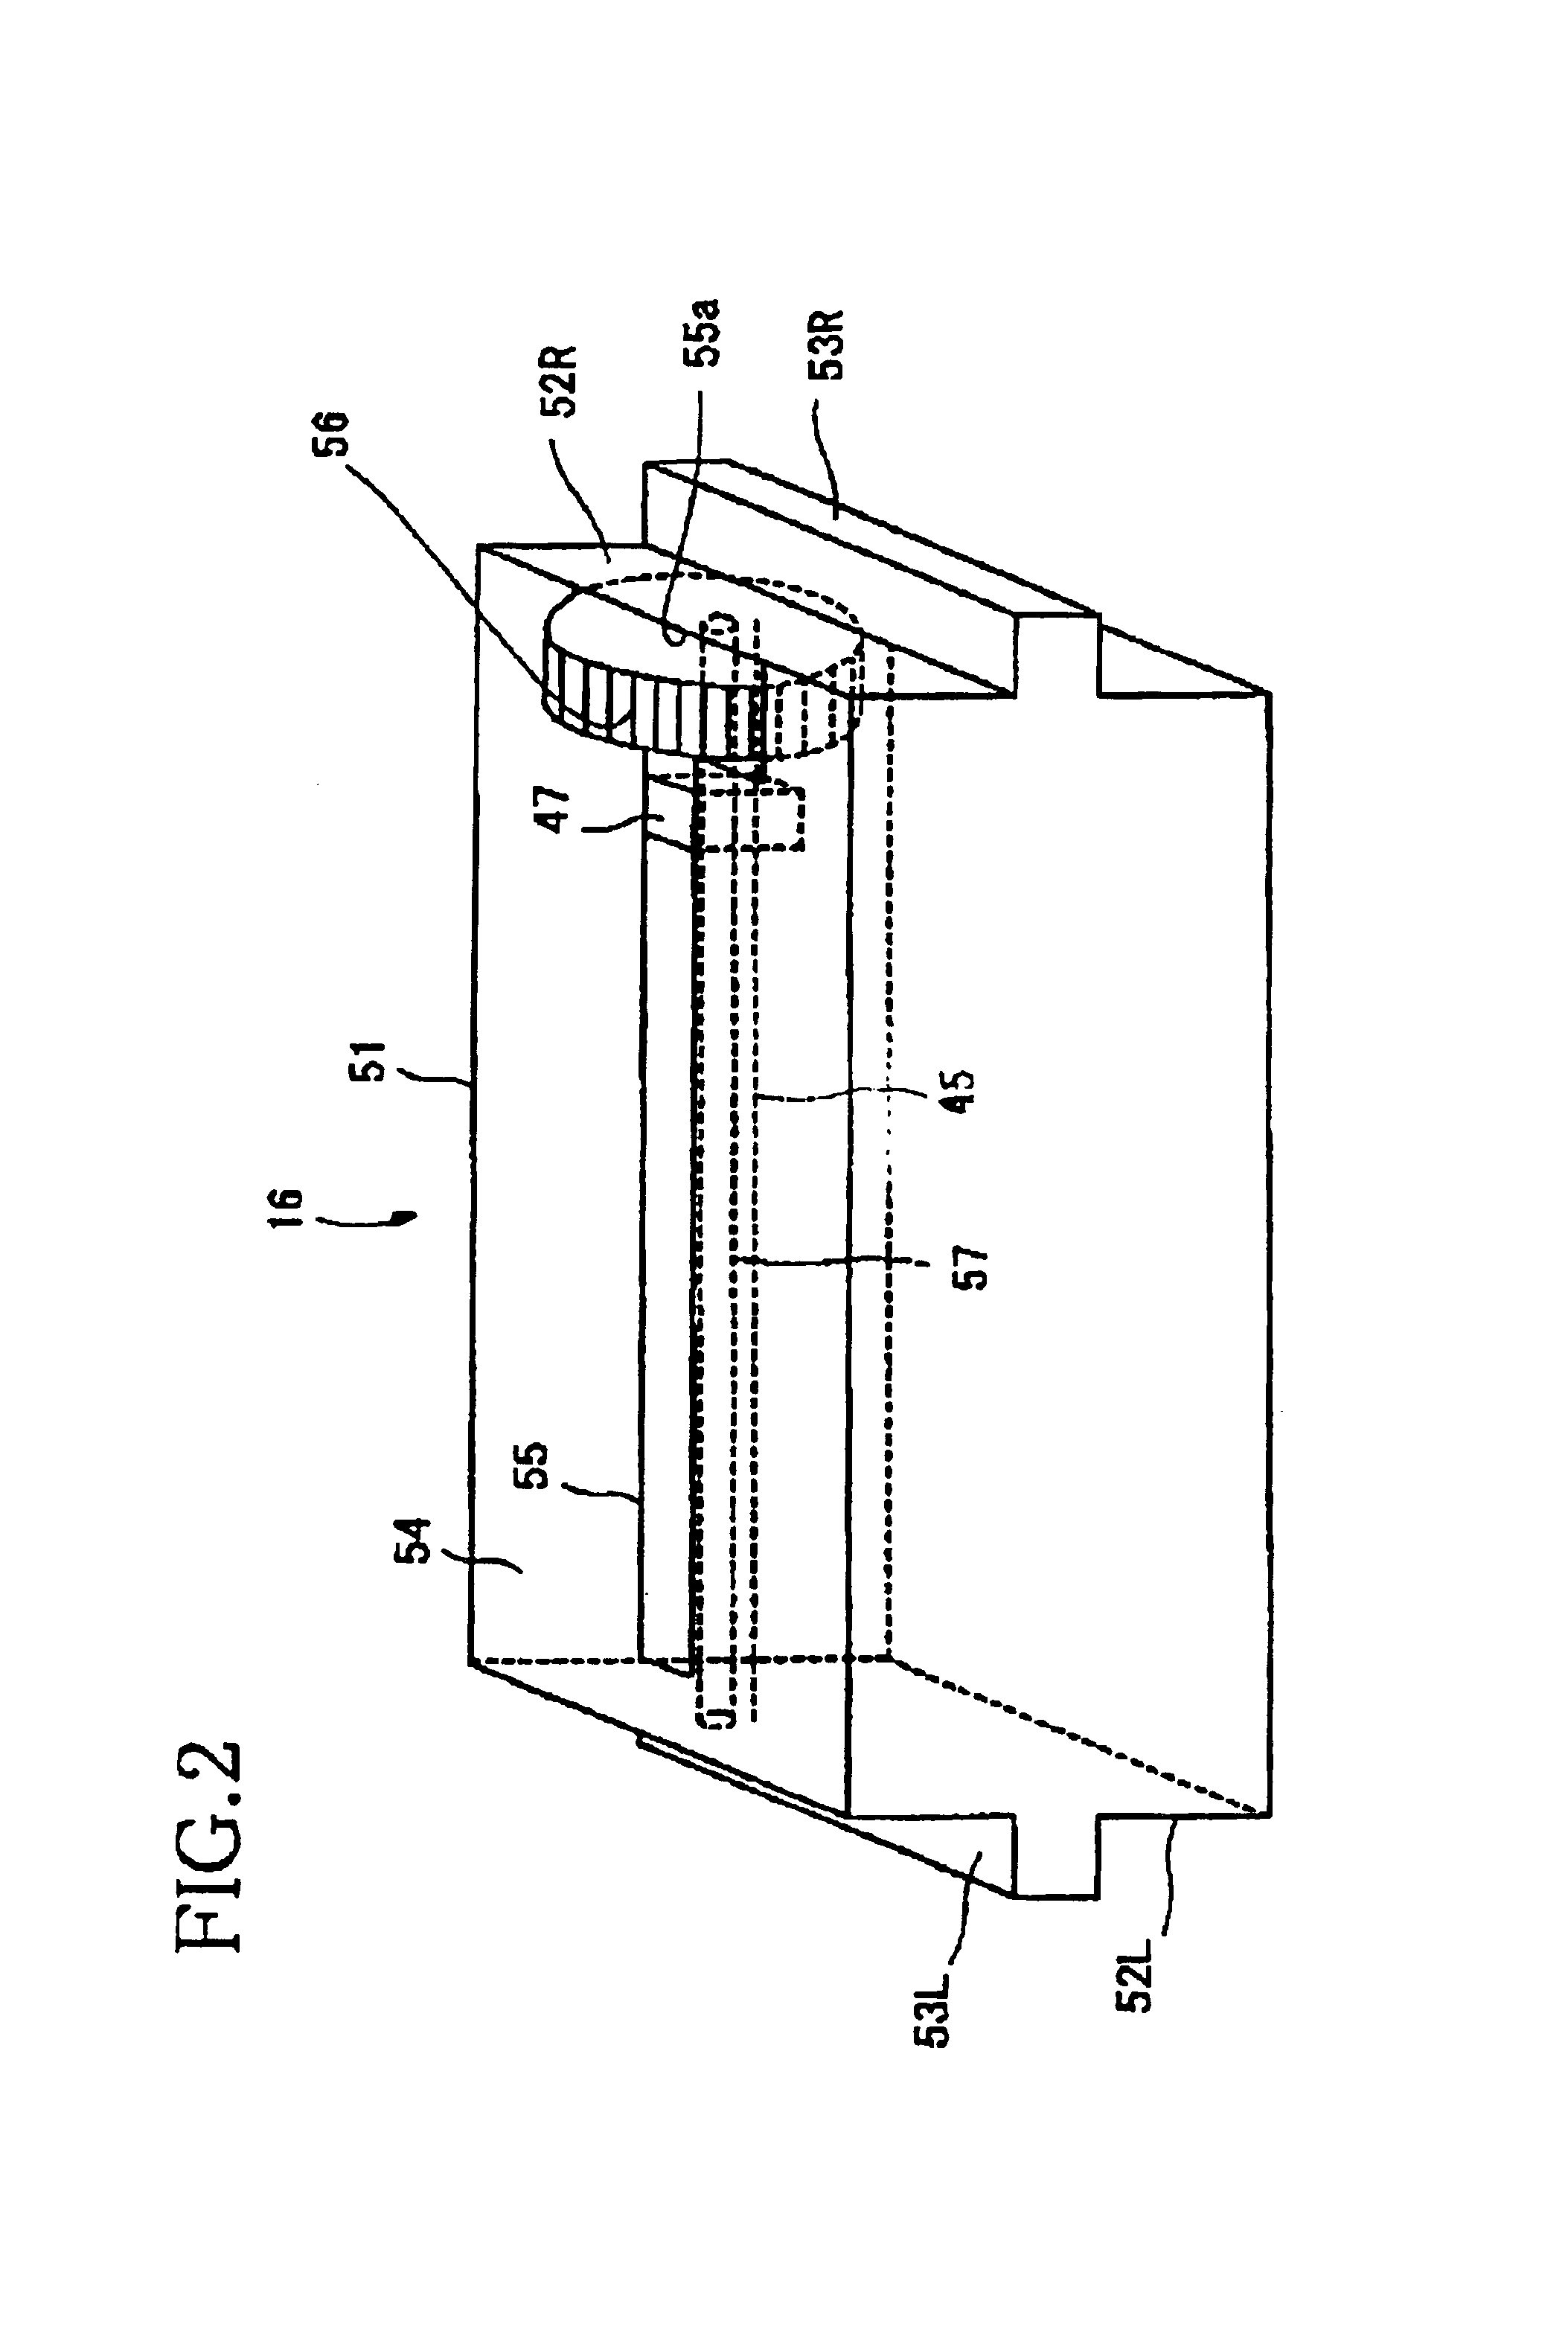 Image forming apparatus that cleans a wire of a charger